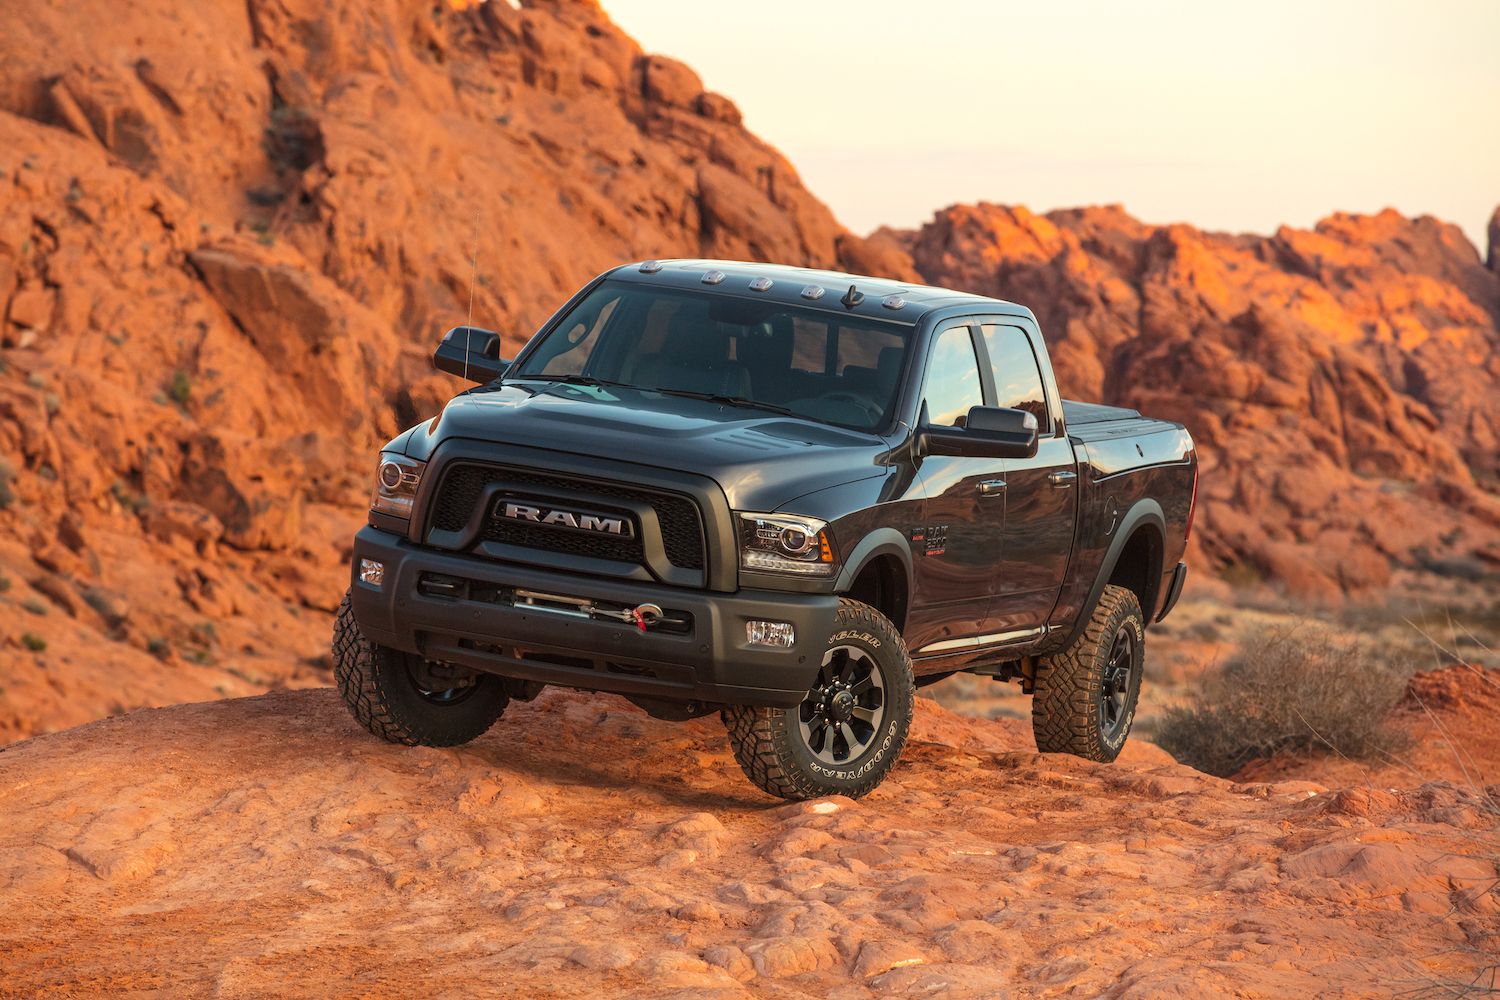 2018 Ram 2500 Performance Review - The Car Connection